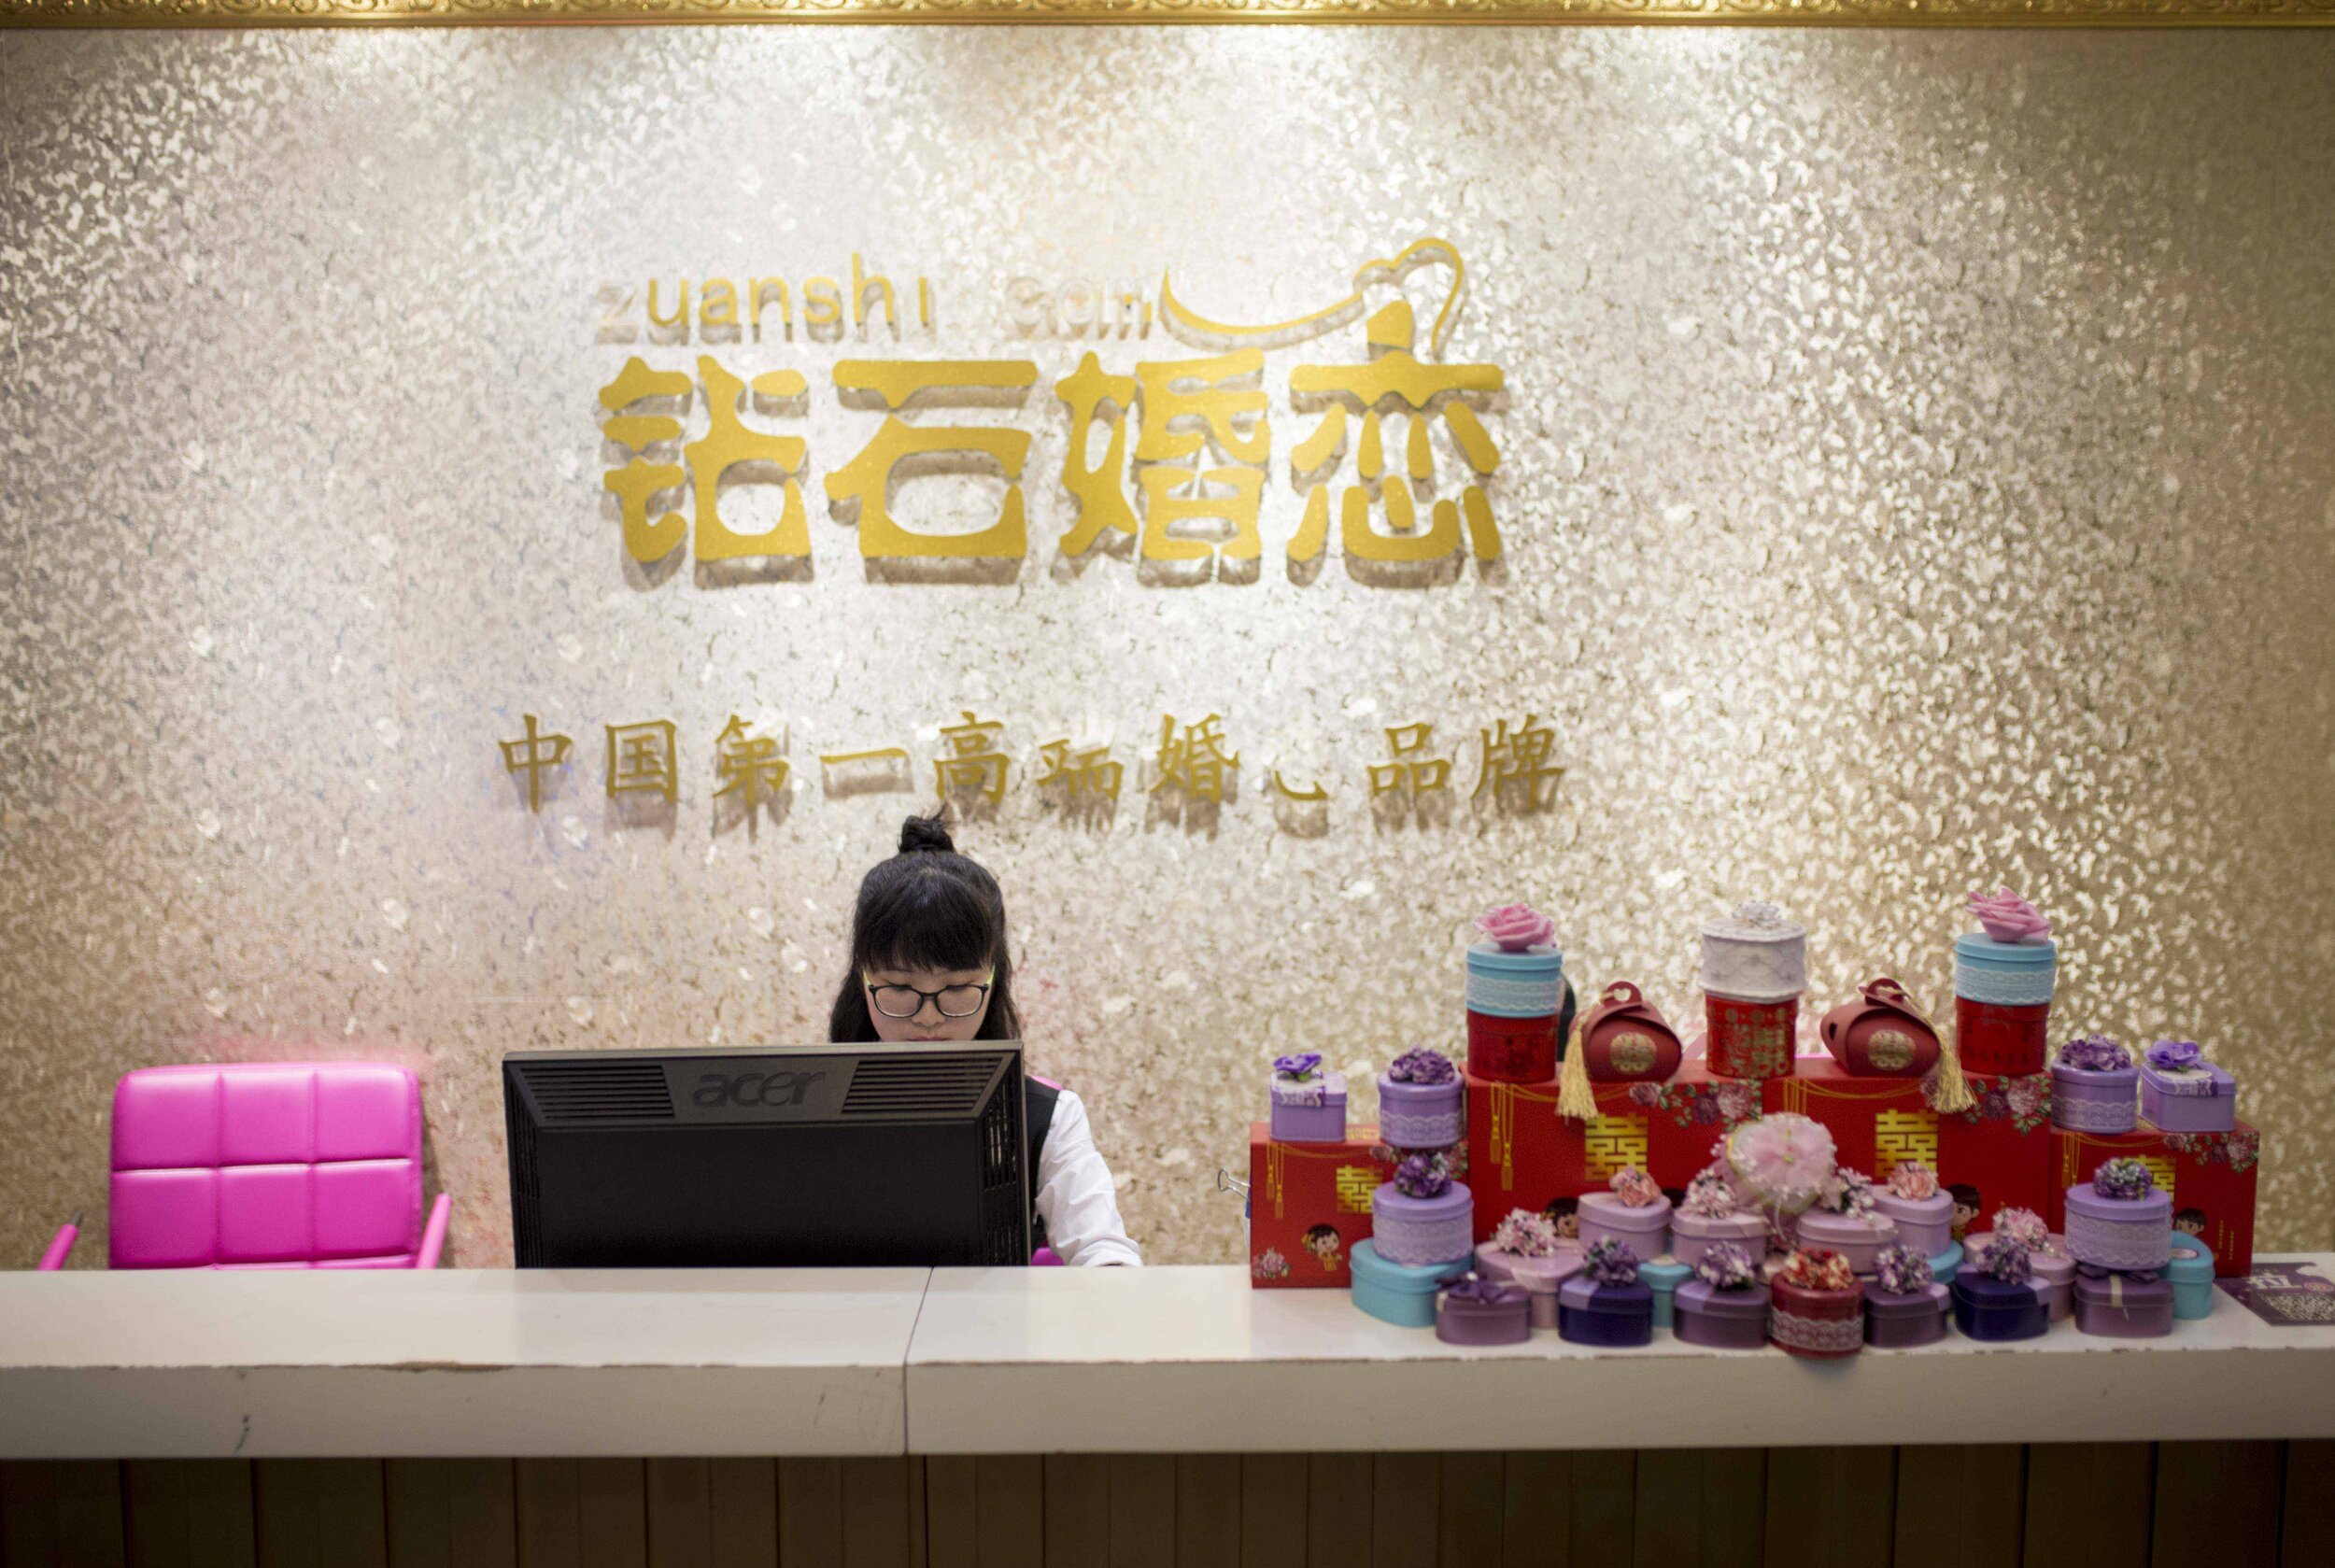  The reception at Diamond Love, a matchmaking agency based in Shanghai that specializes in finding partners for multimillionaires who don’t have the time to look for love. 